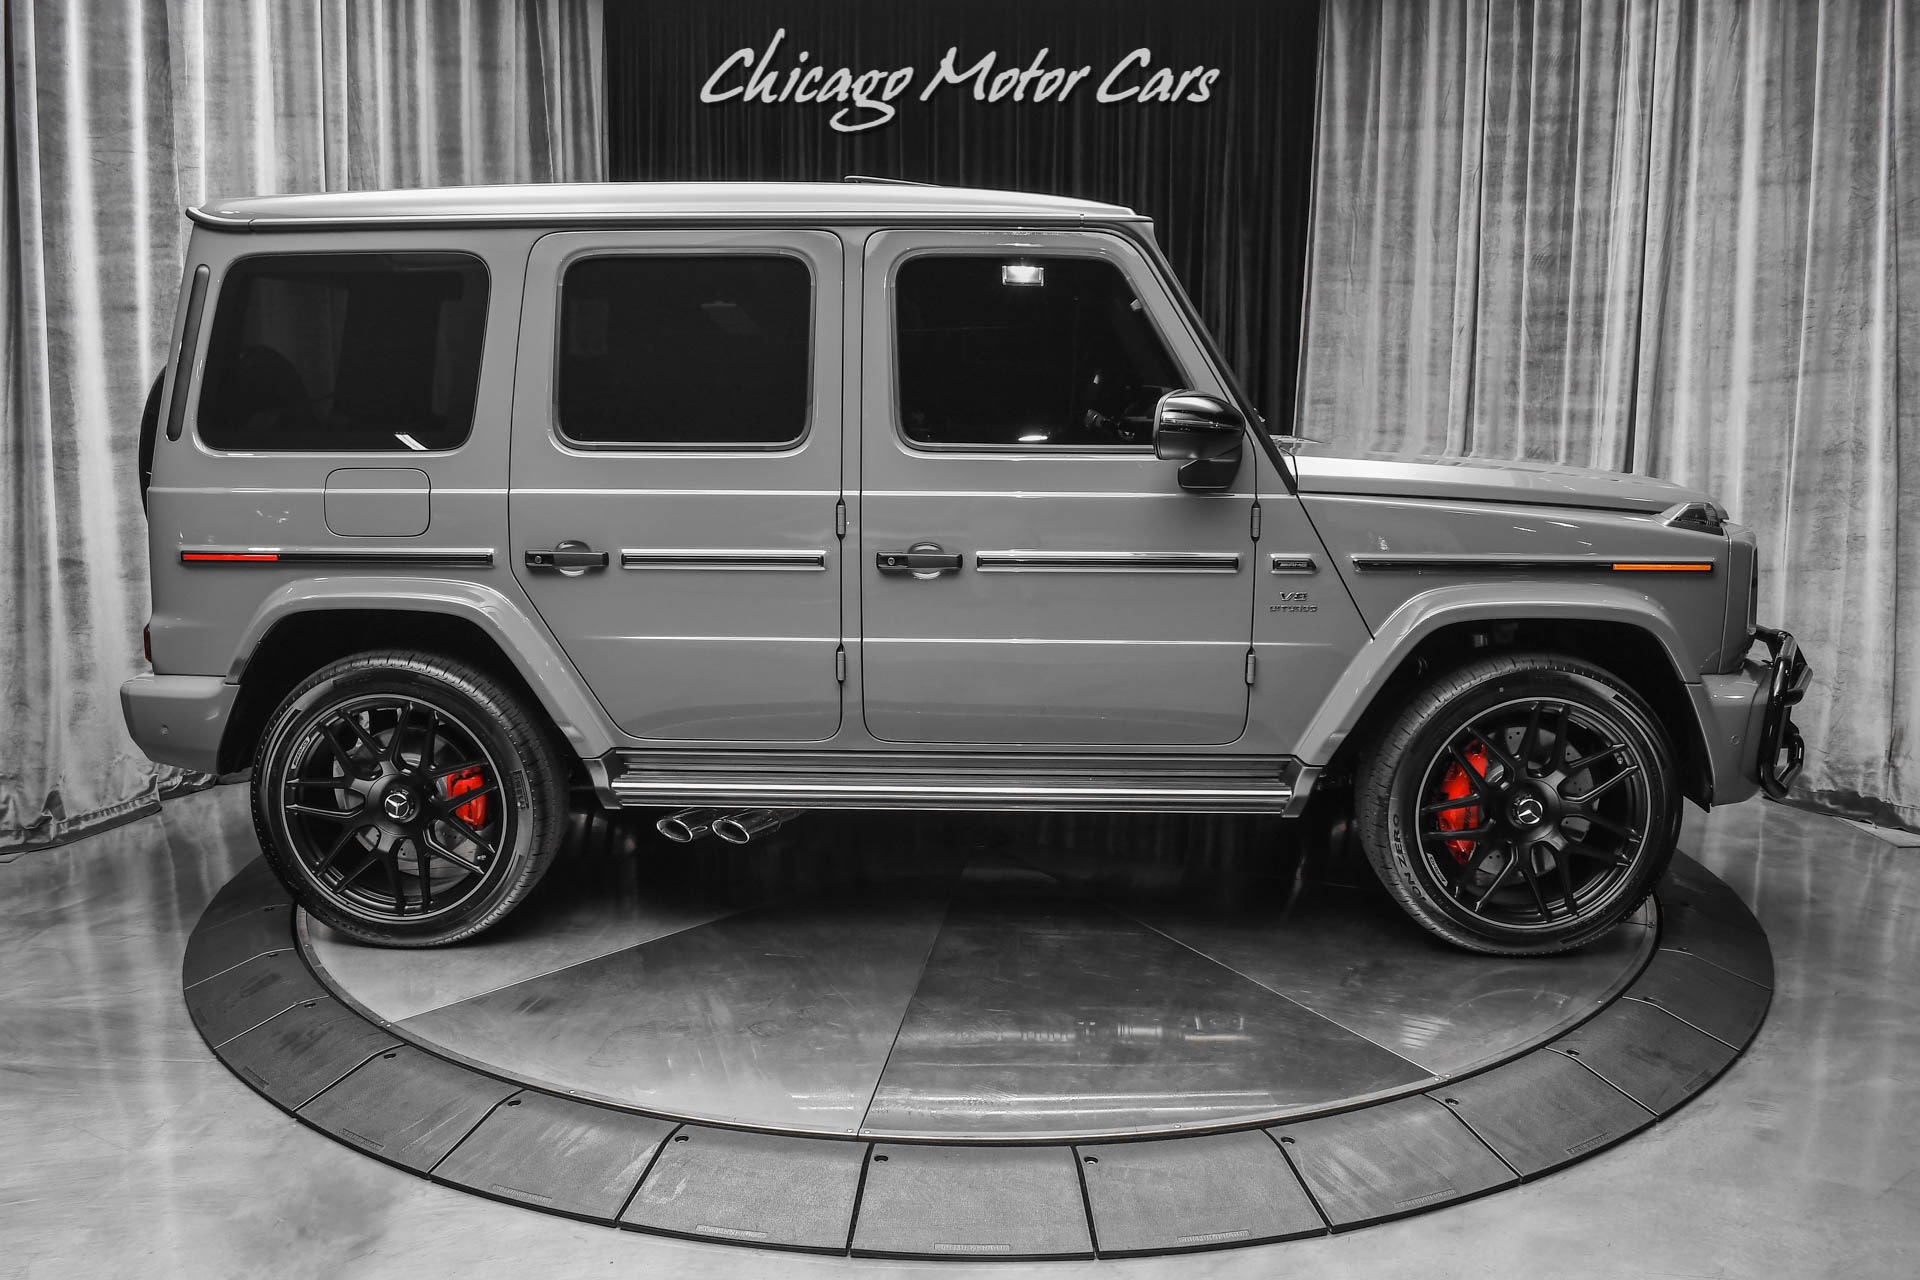 Used 21 Mercedes Benz G63 Amg Suv Rare Arabian Grey Paint 81 Miles Carbon Fiber Interior Pack For Sale Special Pricing Chicago Motor Cars Stock